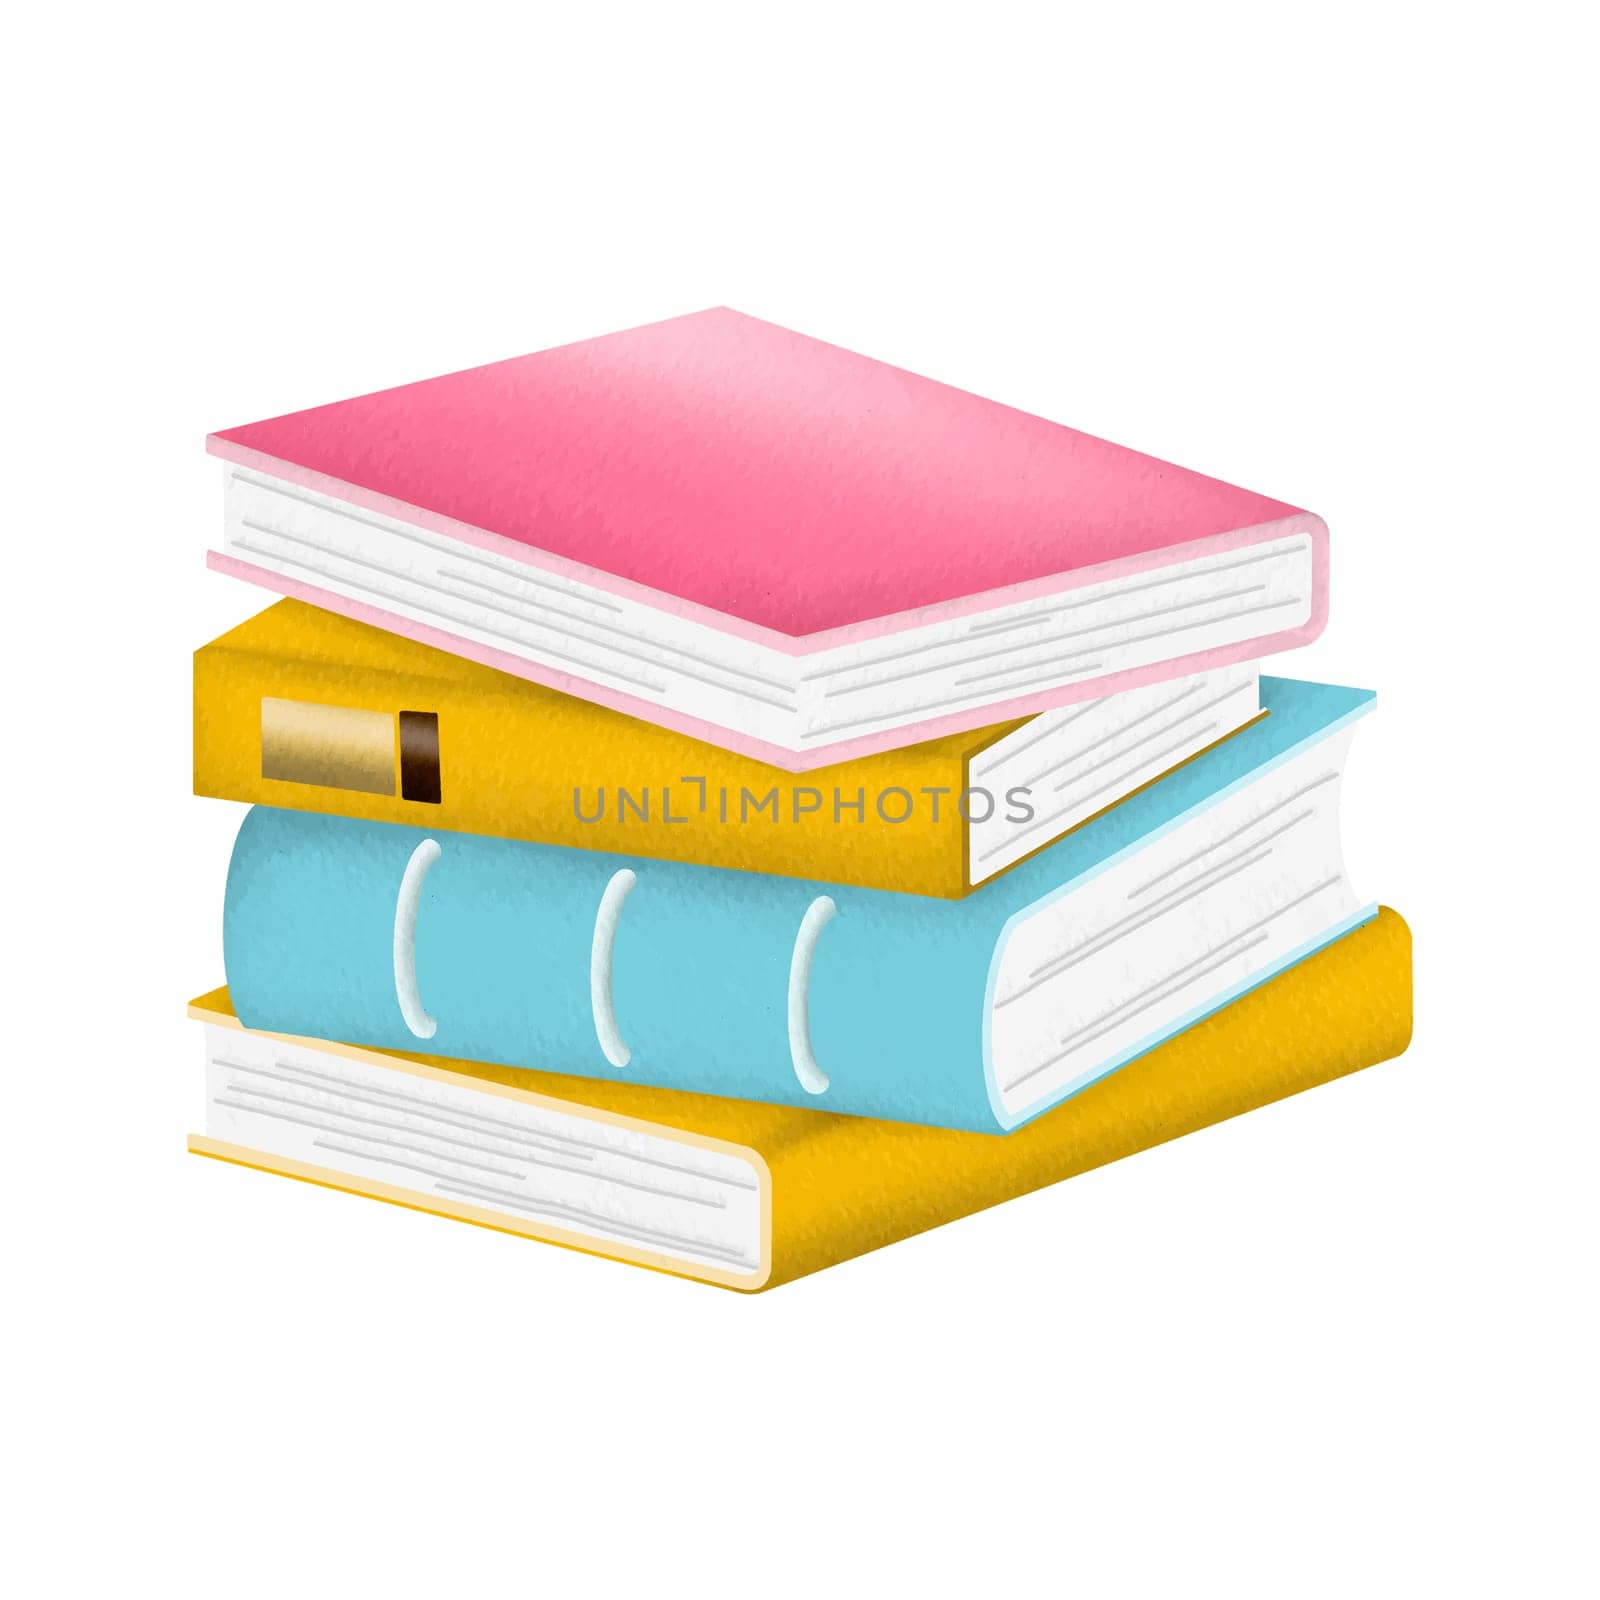 Bookworm Stack of Books with pink blue gold covers illustration isolated clipart  by Skyecreativestudio